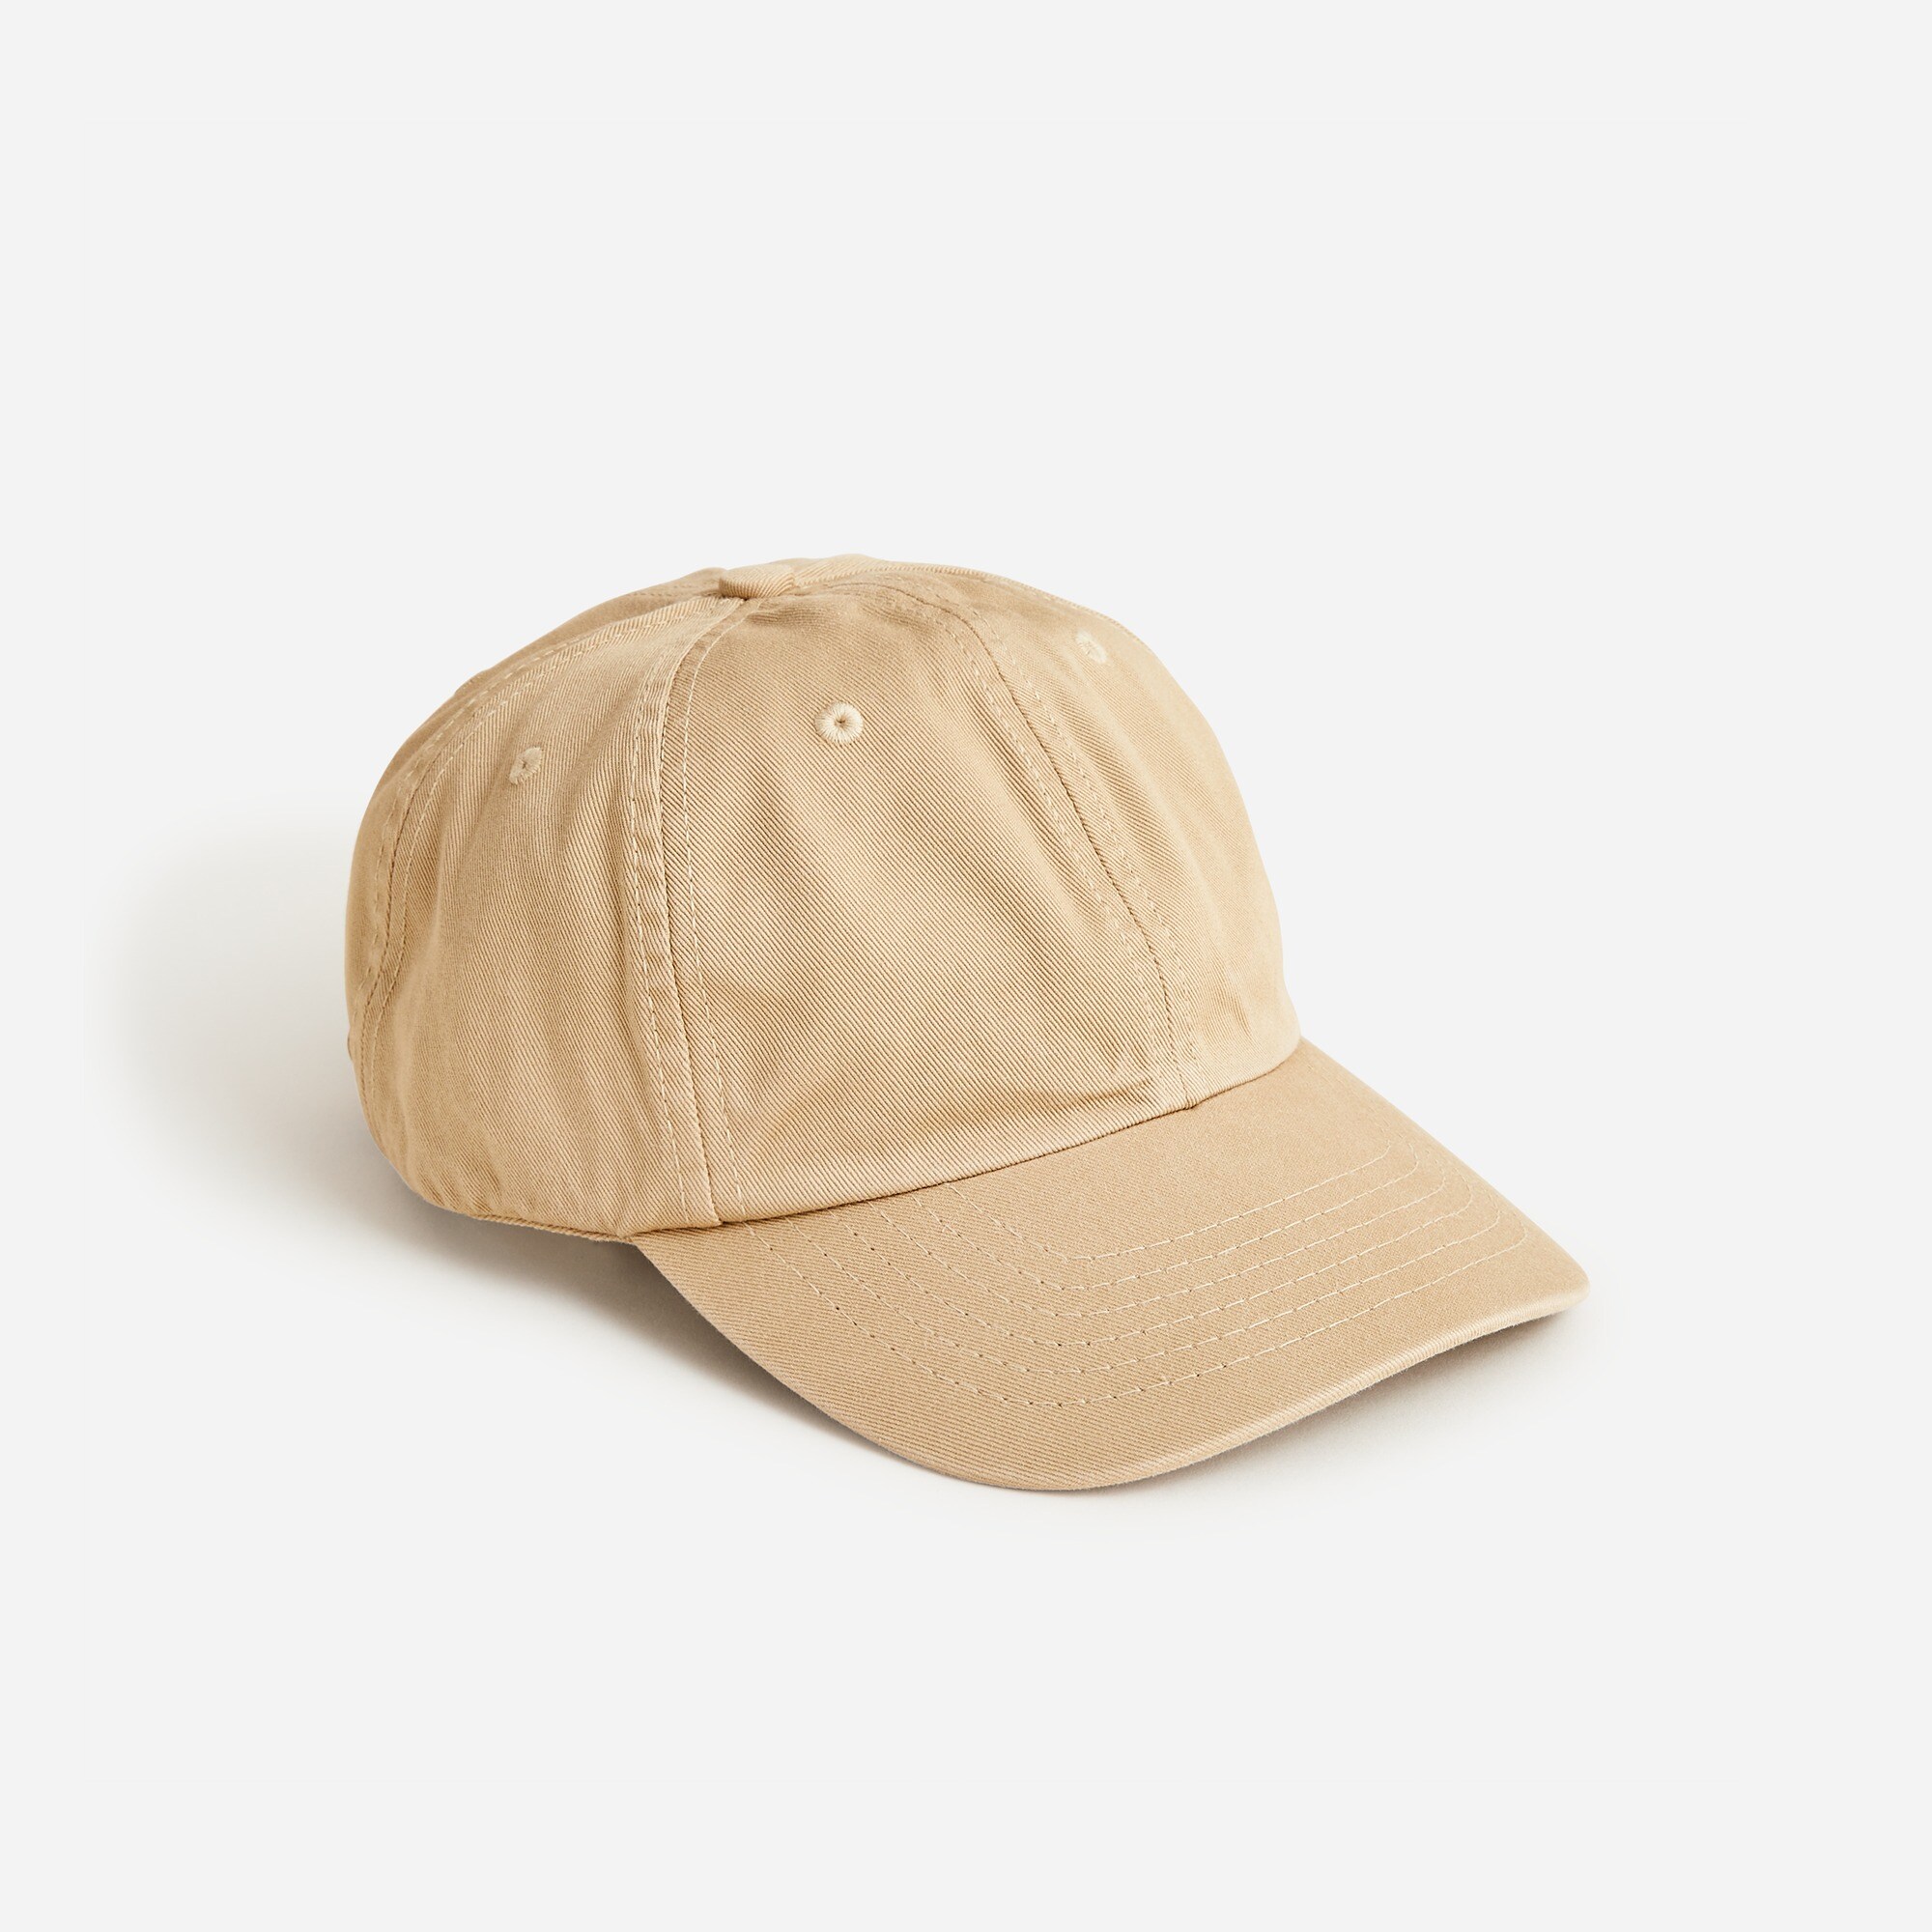 mens Made-in-the-USA garment-dyed twill baseball cap